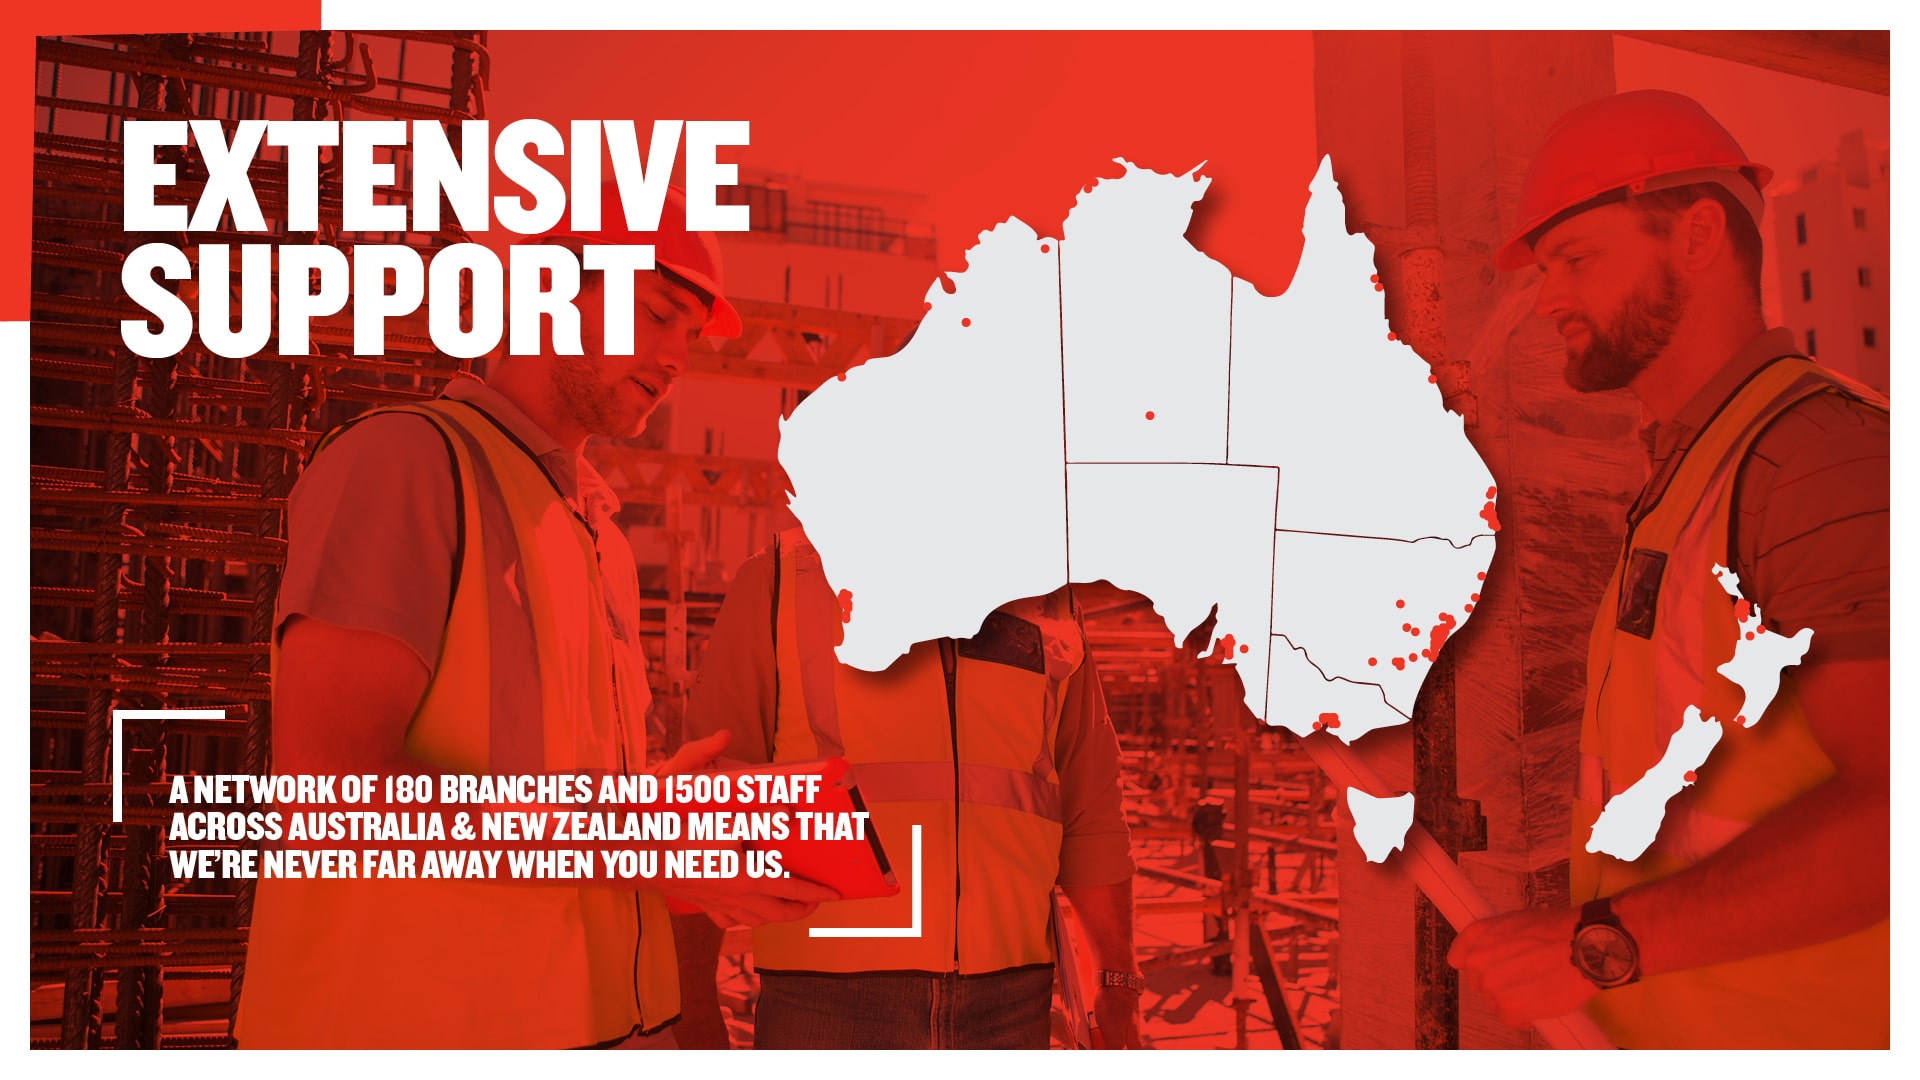 Kennards design of workers with an Australian map showing all the support locations